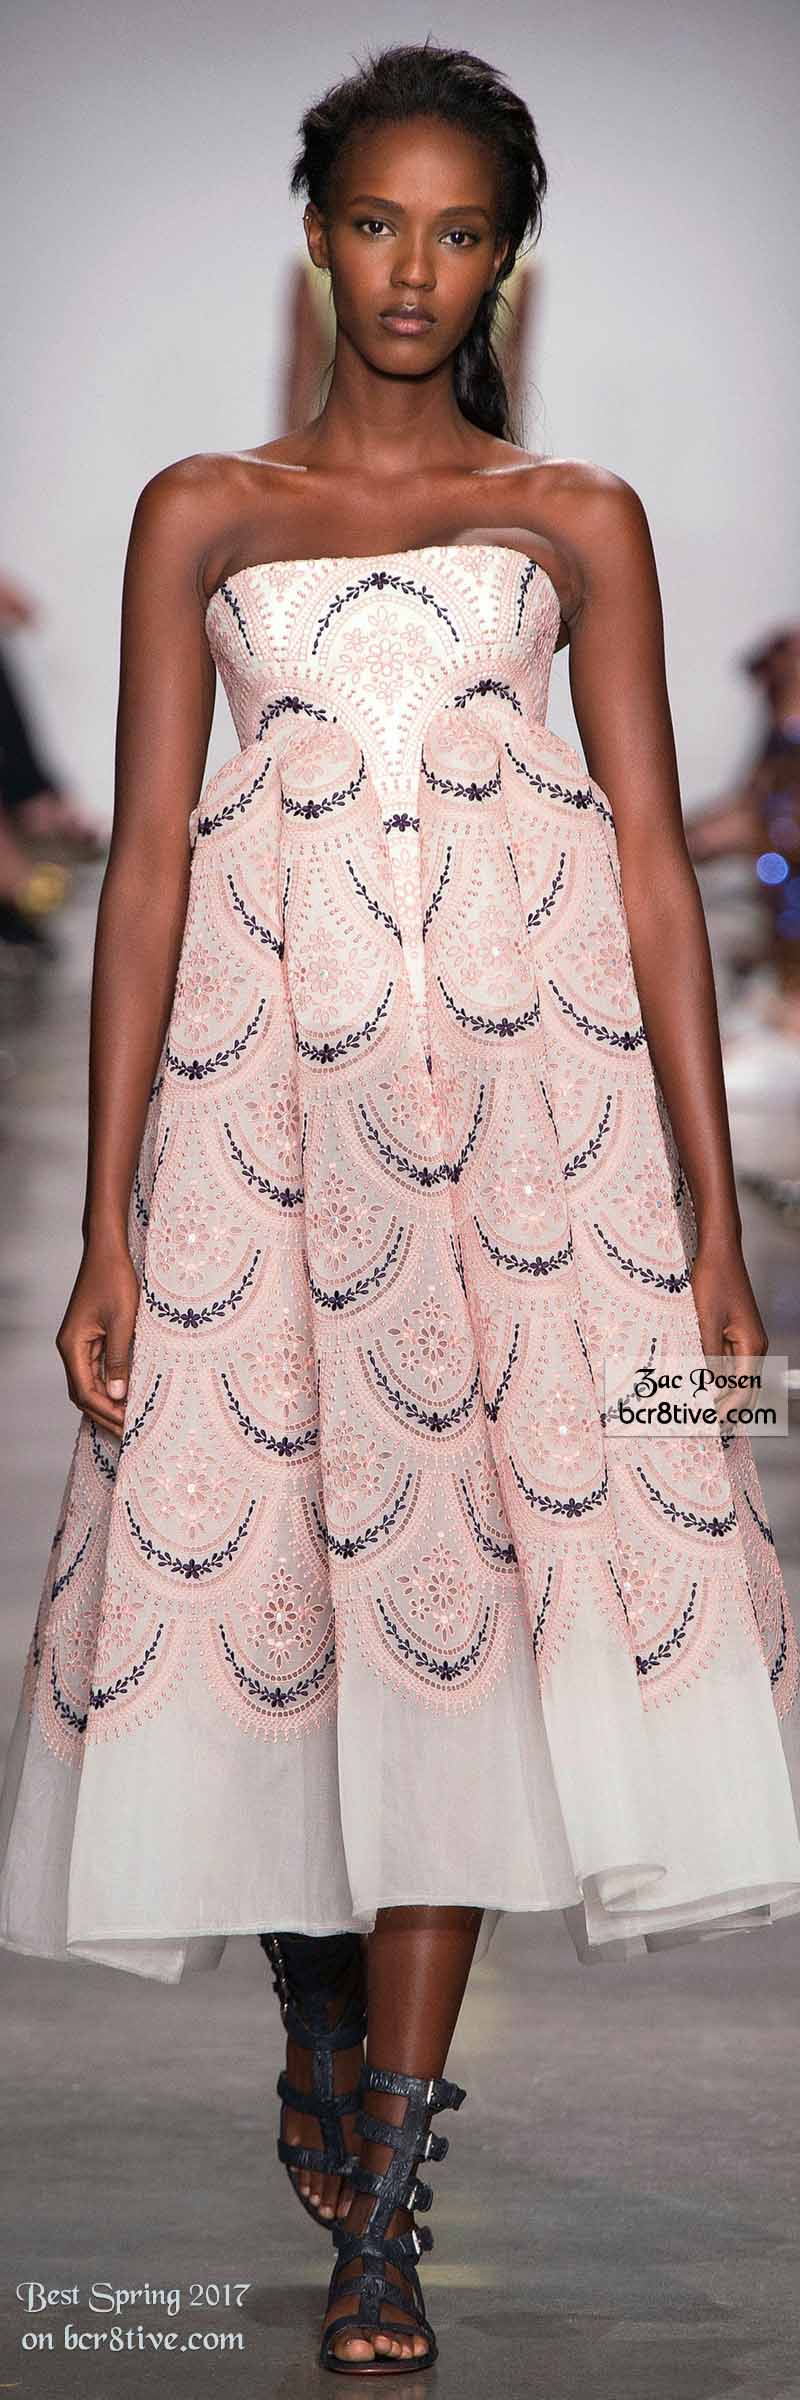 Zac Posen - The Best Looks from New York Fashion Week Spring 2017